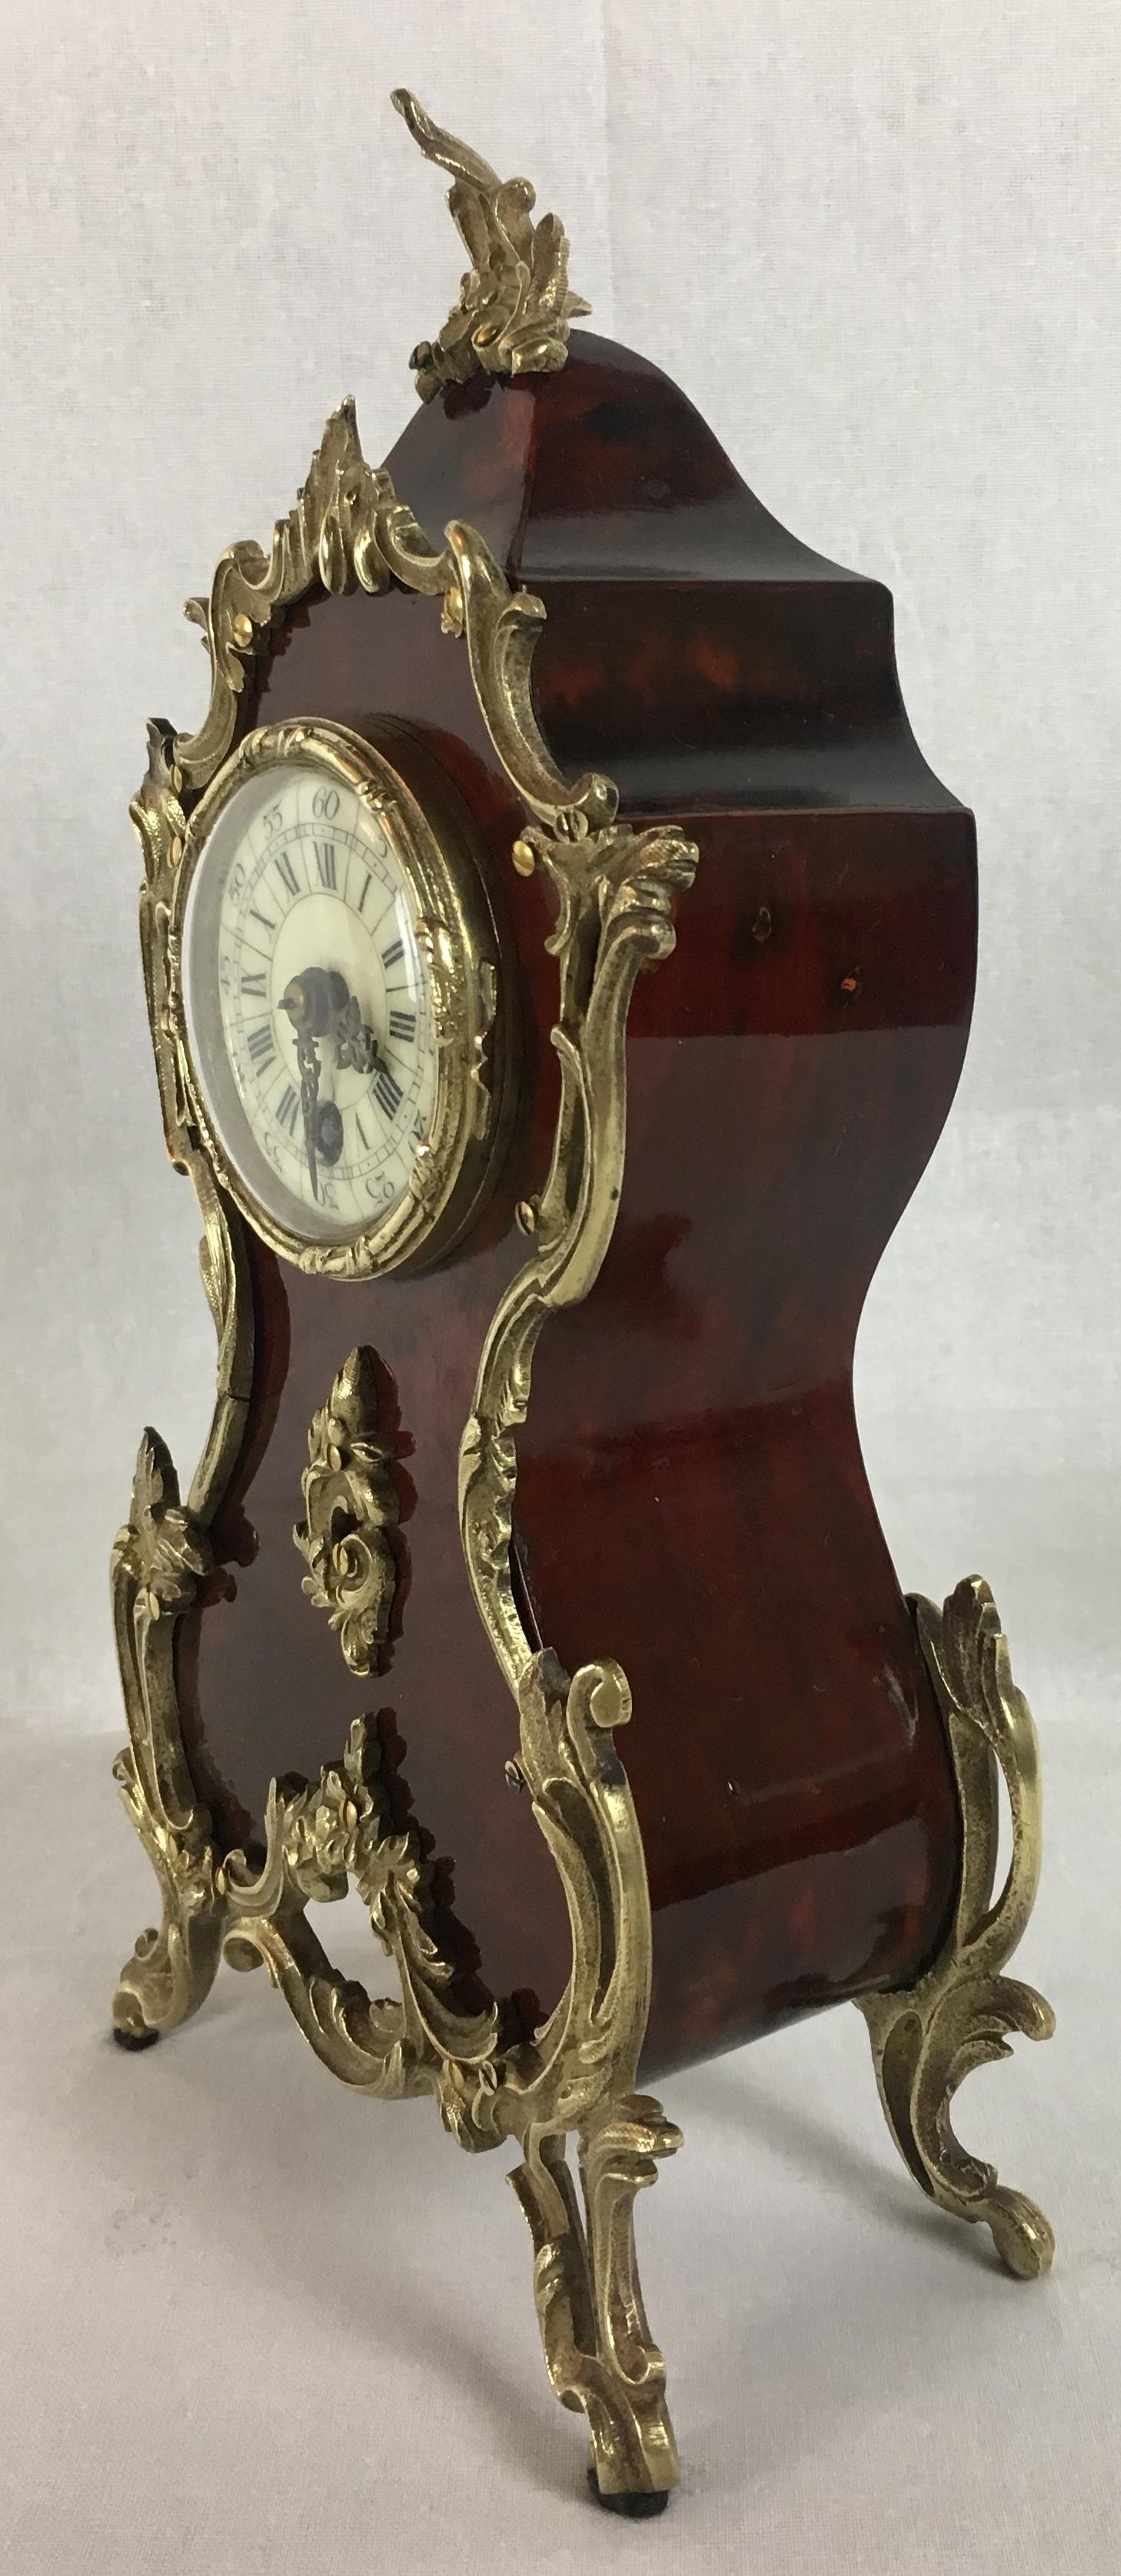 A superb quality antique French clock, circa 1875. This Boulle style mantel clock is made with red tortoiseshell typical of the period, and brass inlays to the case front and sides further accentuates the beauty and high quality craftsmanship.